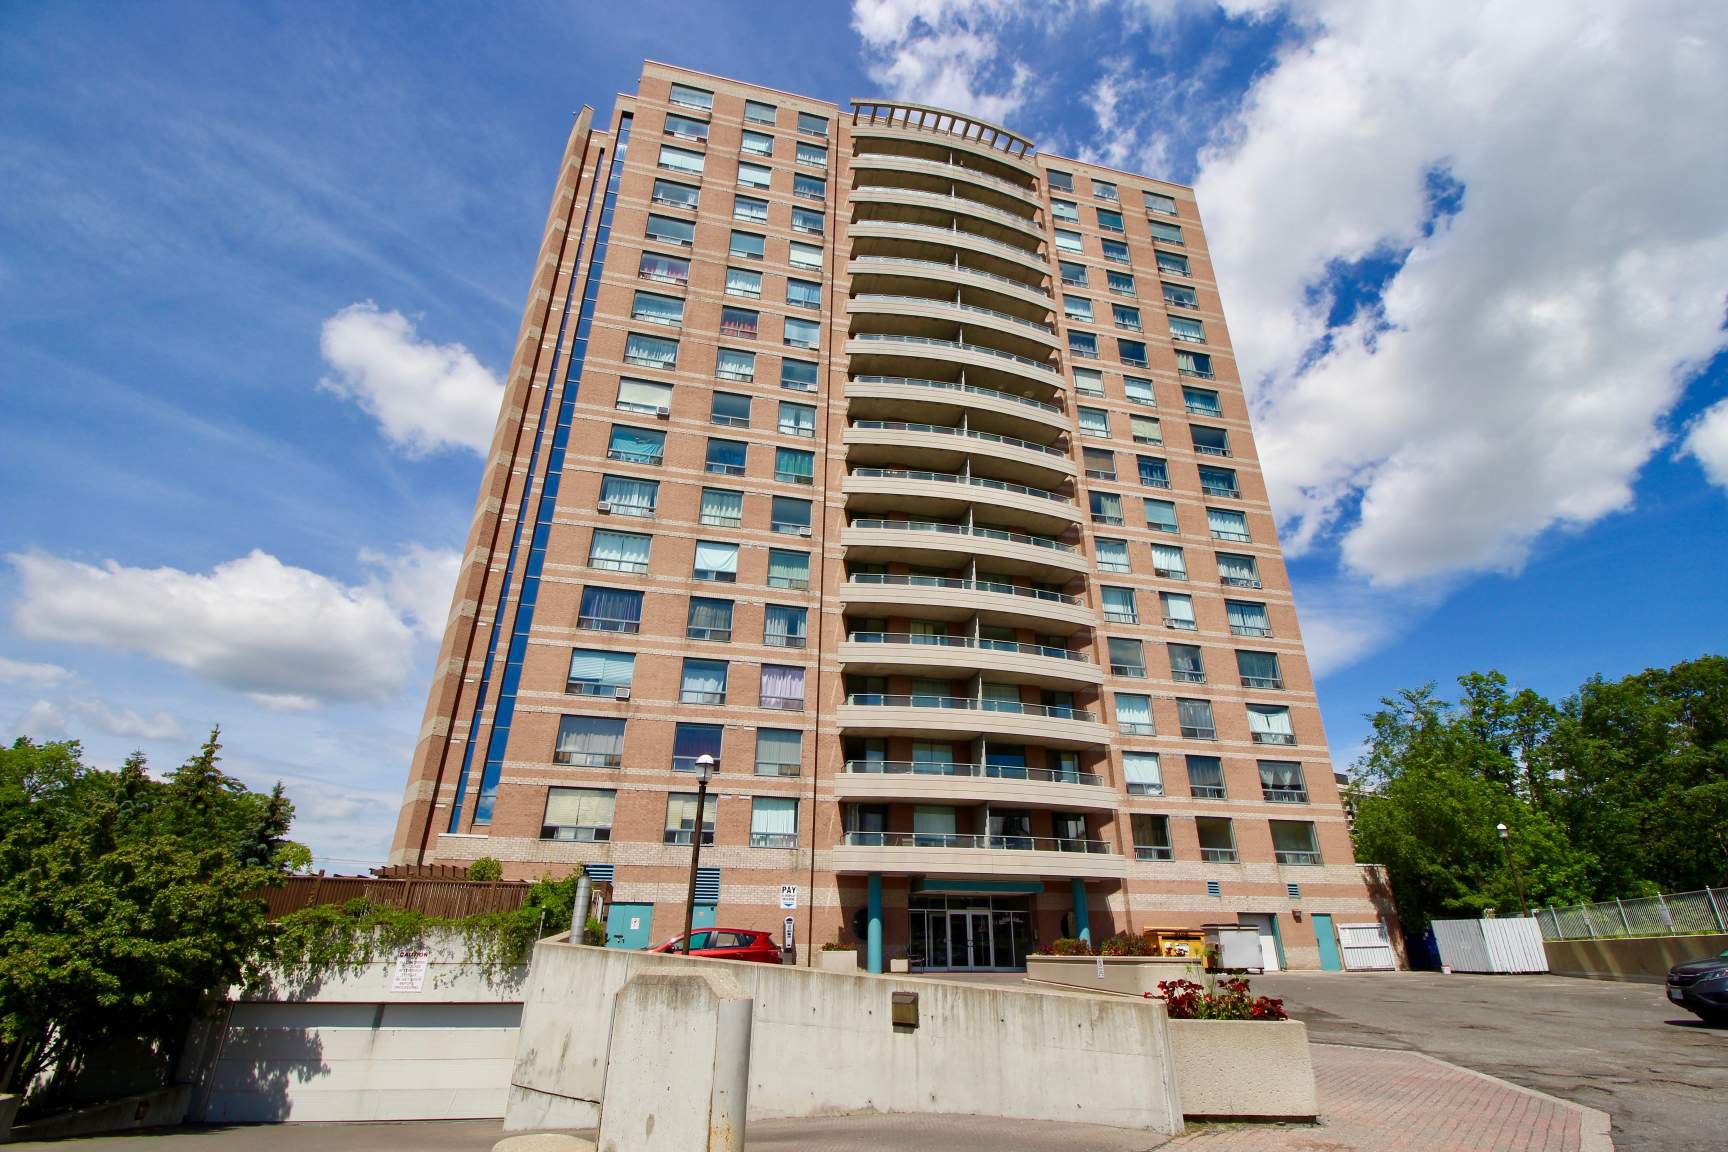 parkdale apartments for rent ottawa